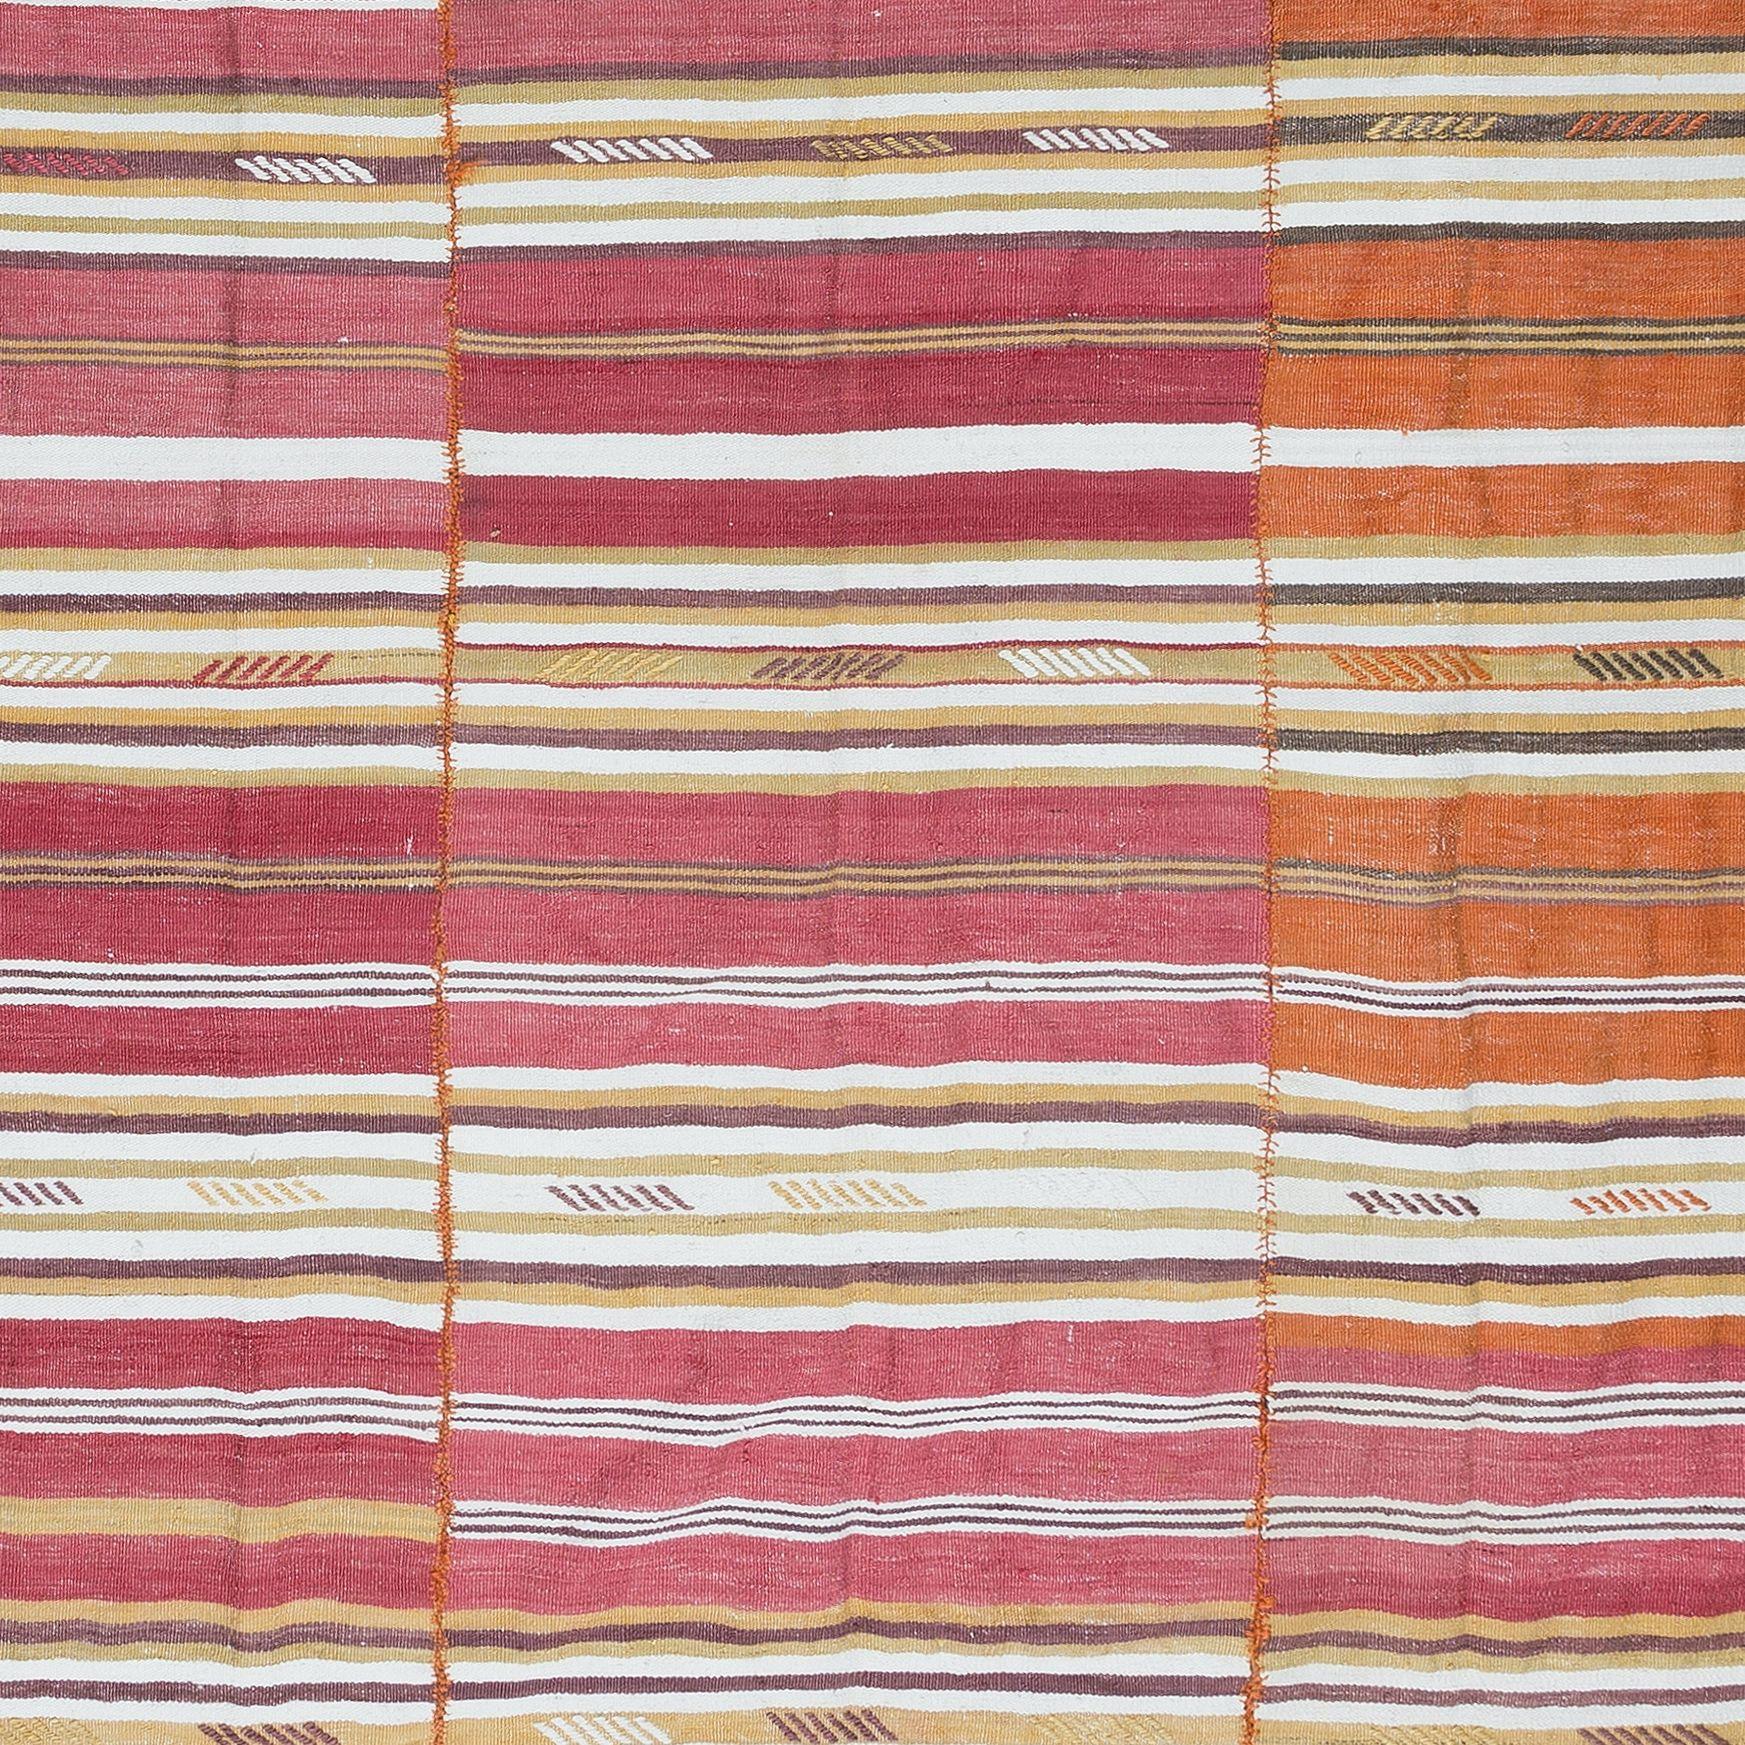 6x8 Ft Hand-Woven Anatolian Kilim, Striped Multicolor Rug, Flat-Weave, 100% Wool In Good Condition For Sale In Philadelphia, PA